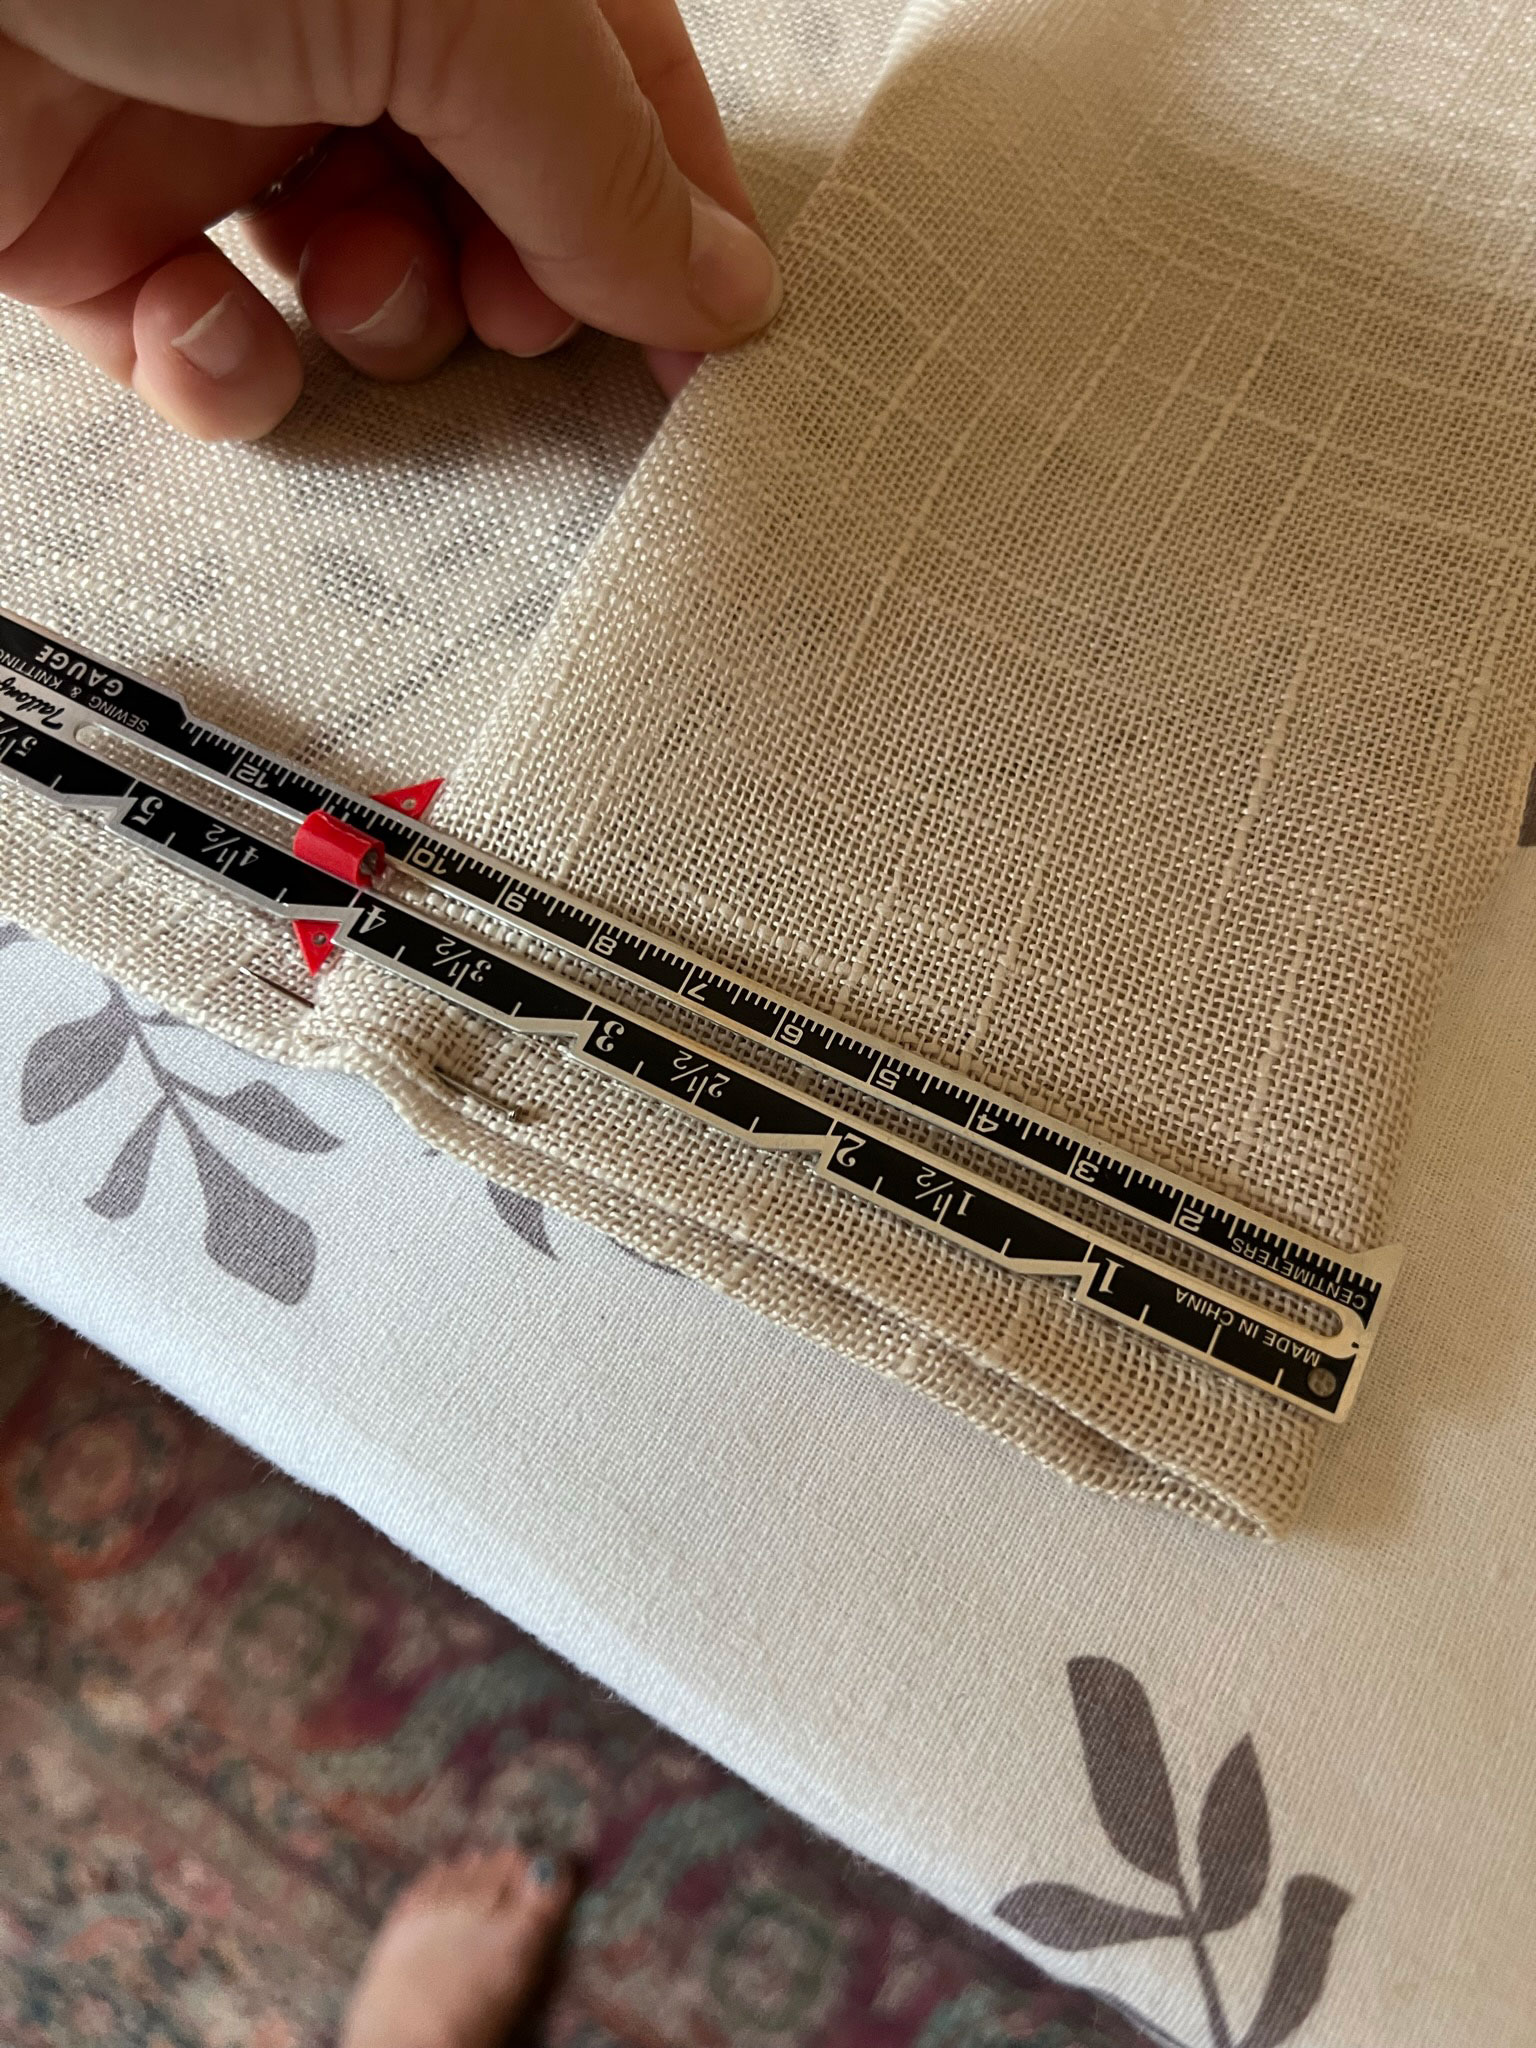 measuring a 4 inch hem on cafe curtains